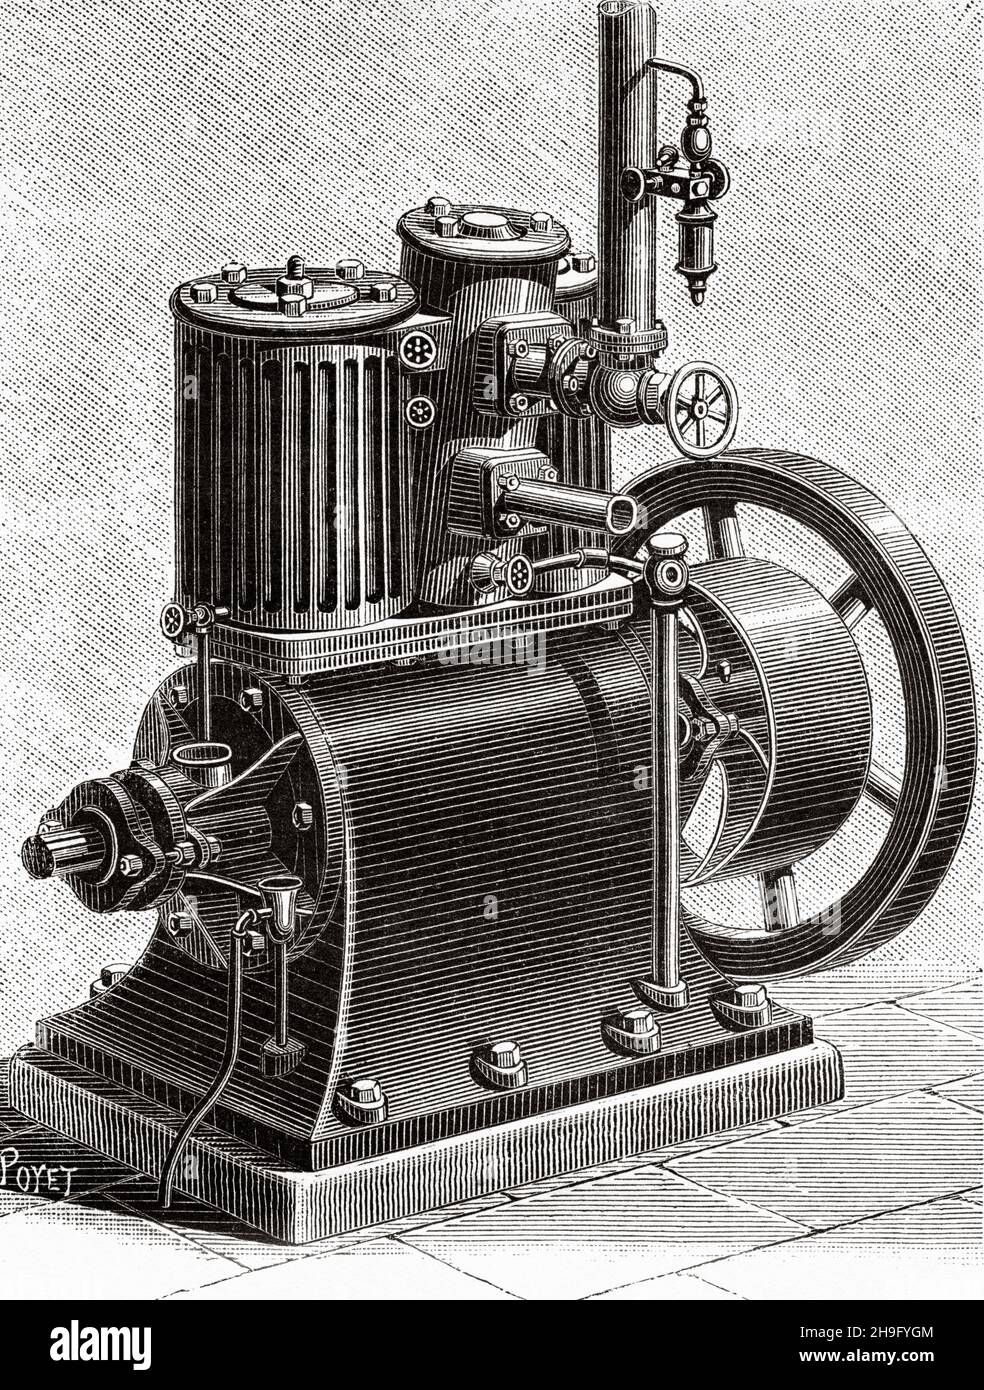 Westinghouse system high speed steam engine. Old 19th century engraved illustration from La Nature 1885 Stock Photo